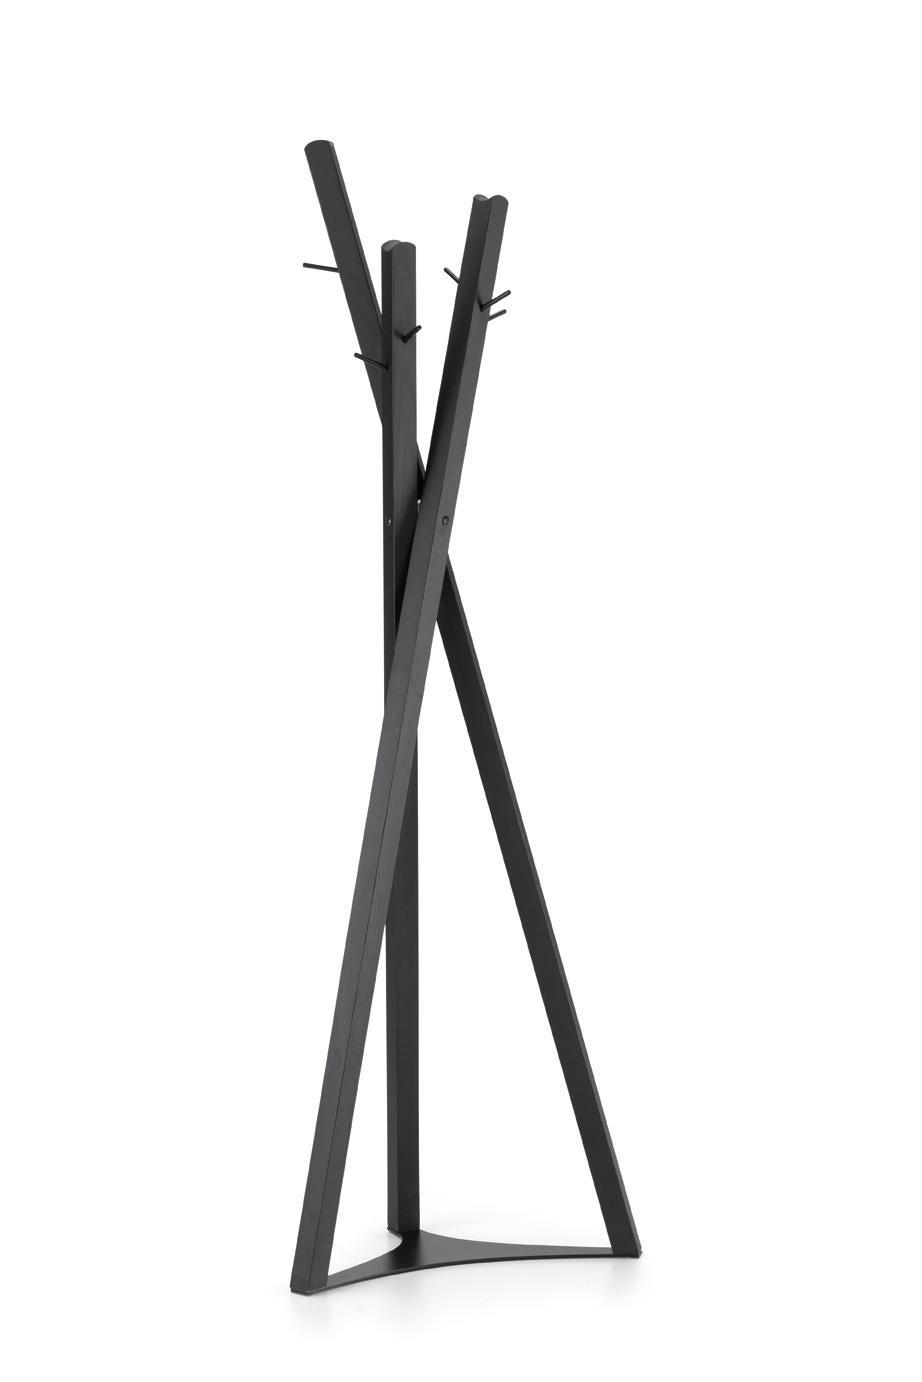 The multifaceted architect and designer, Massimo Broglio, with his cross-cutting style, innovation and pragmatism, has designed the Edith project, which has evolved from a simple chair to an entire collection, encompassing a small table, a coat rack